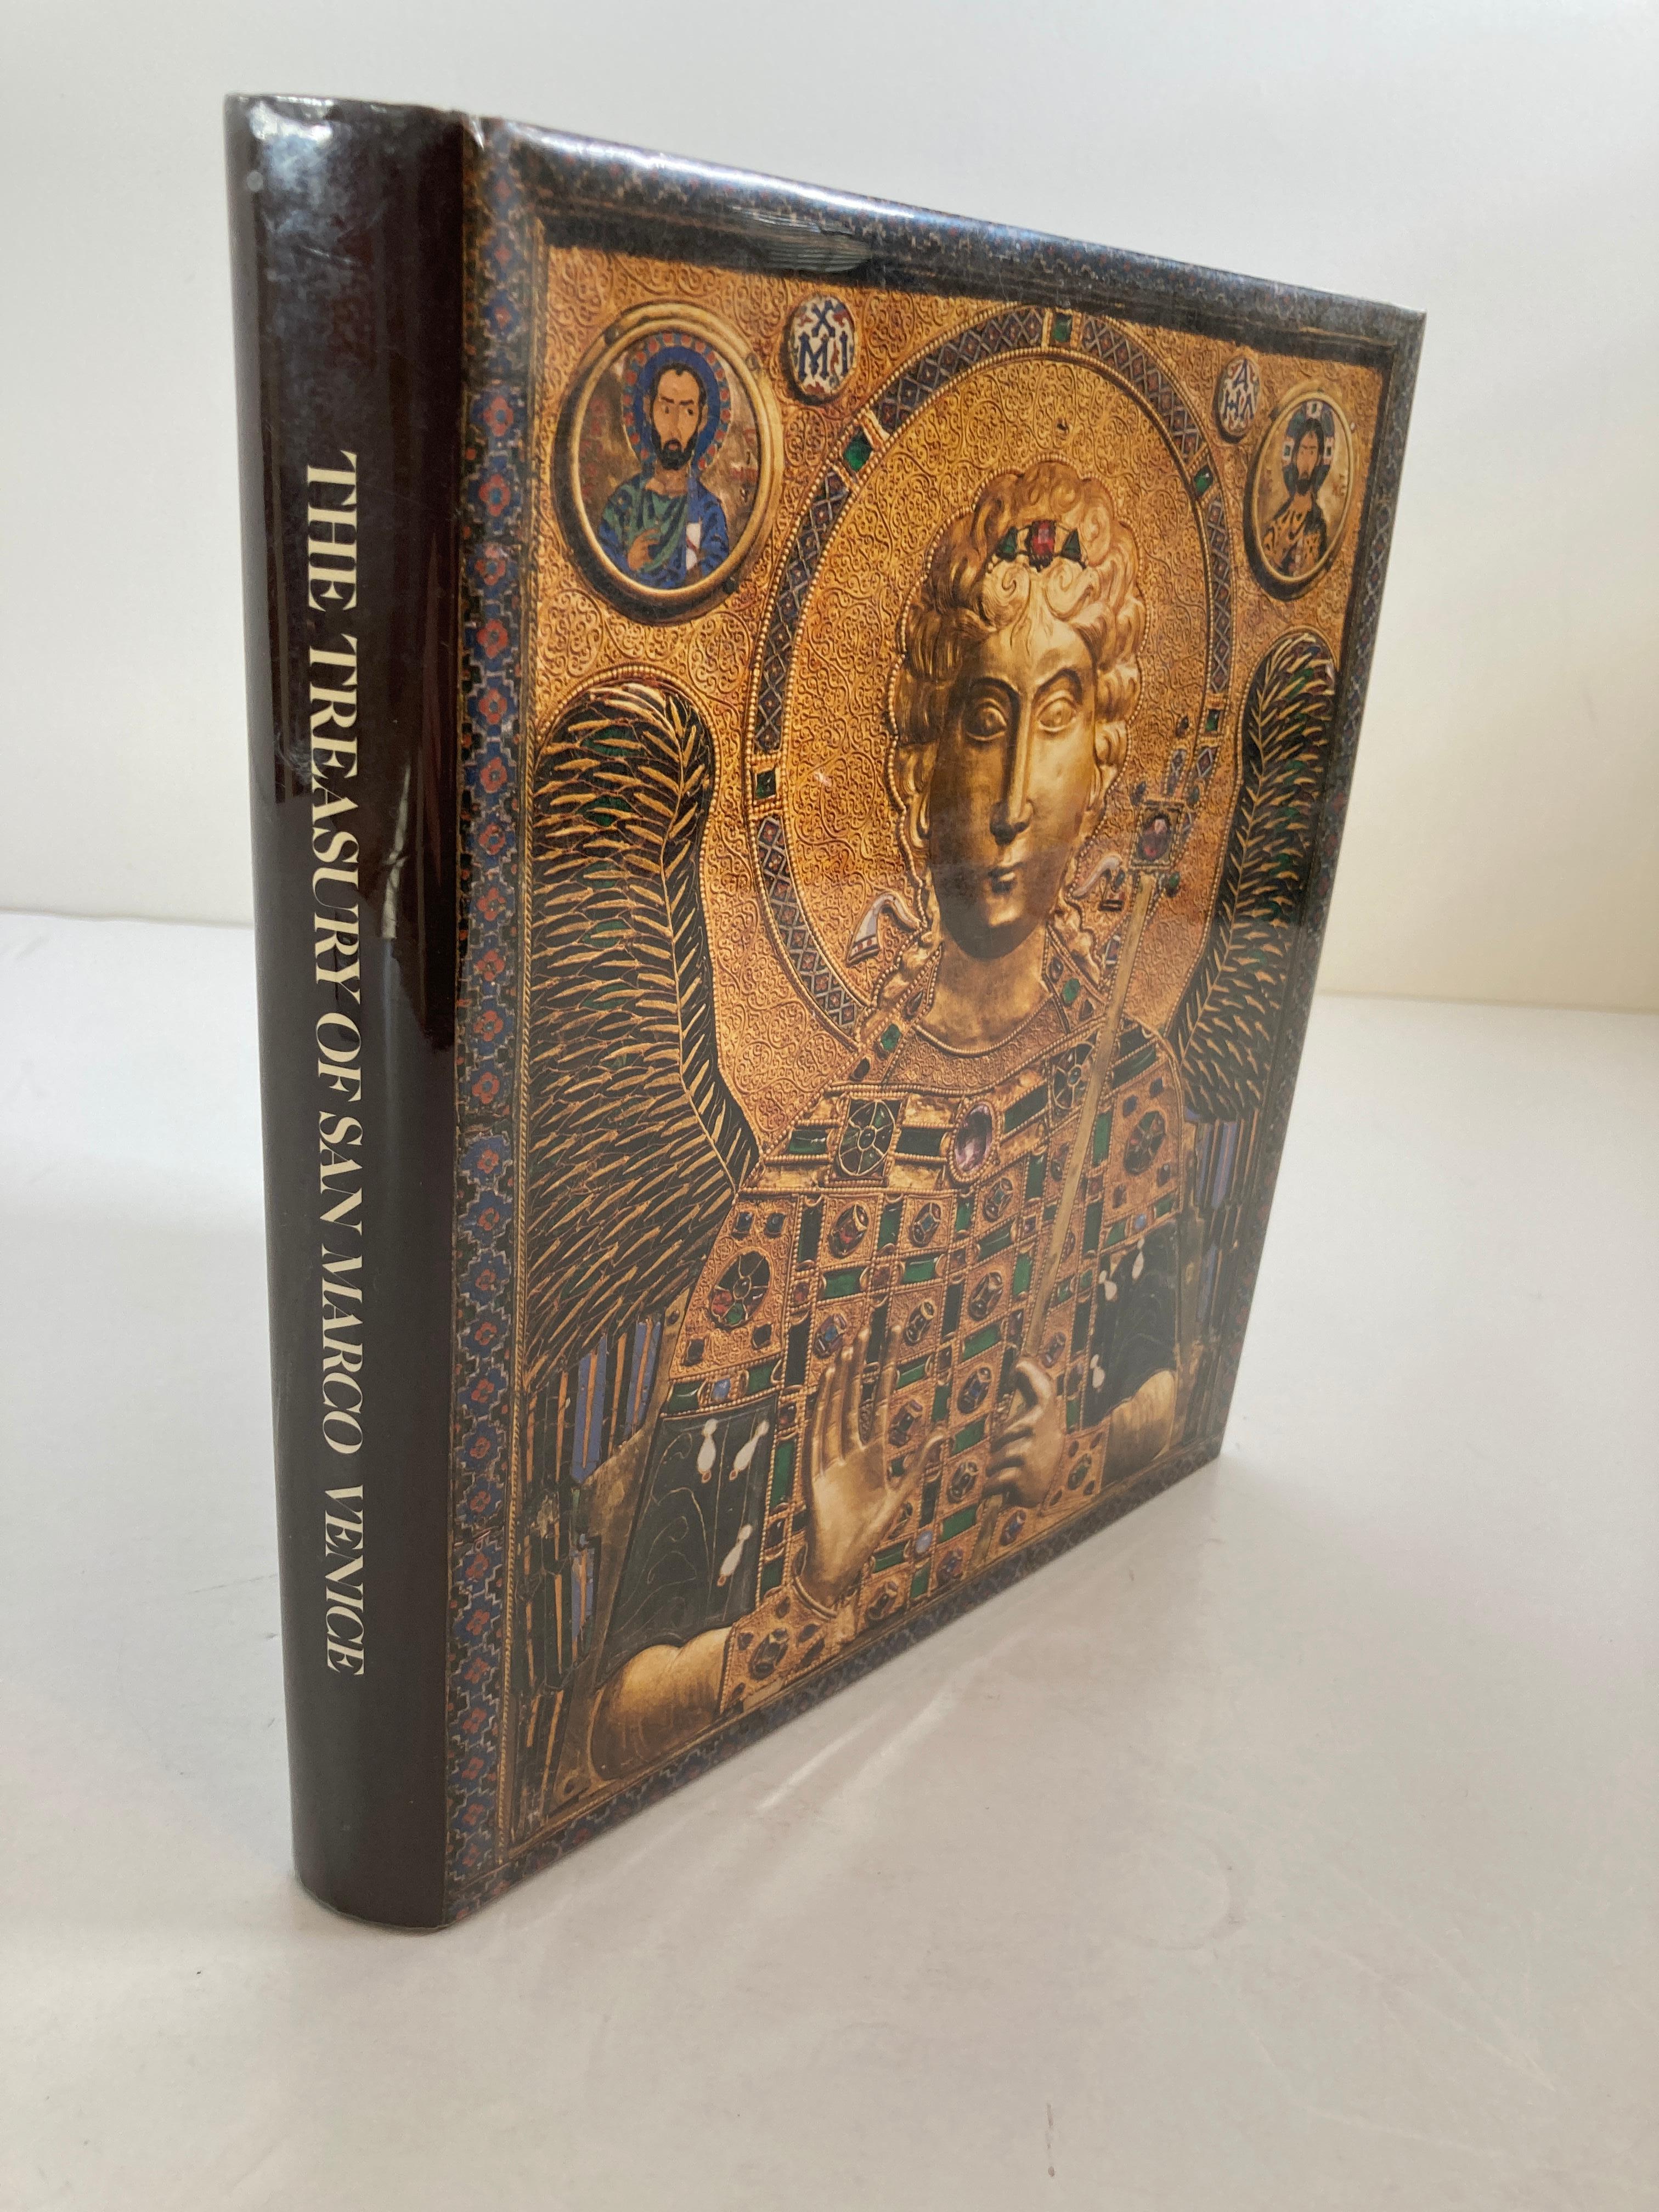 The treasury of San Marco, Venice by David Buckton. Olivetti, Metropolitan Museum of Art, 1984. 1st Ed hardcover with dust jacket. Catalogue of the exhibition held at the Grand Palais in Paris, the British Museum in London, the Romisch-Germanisches